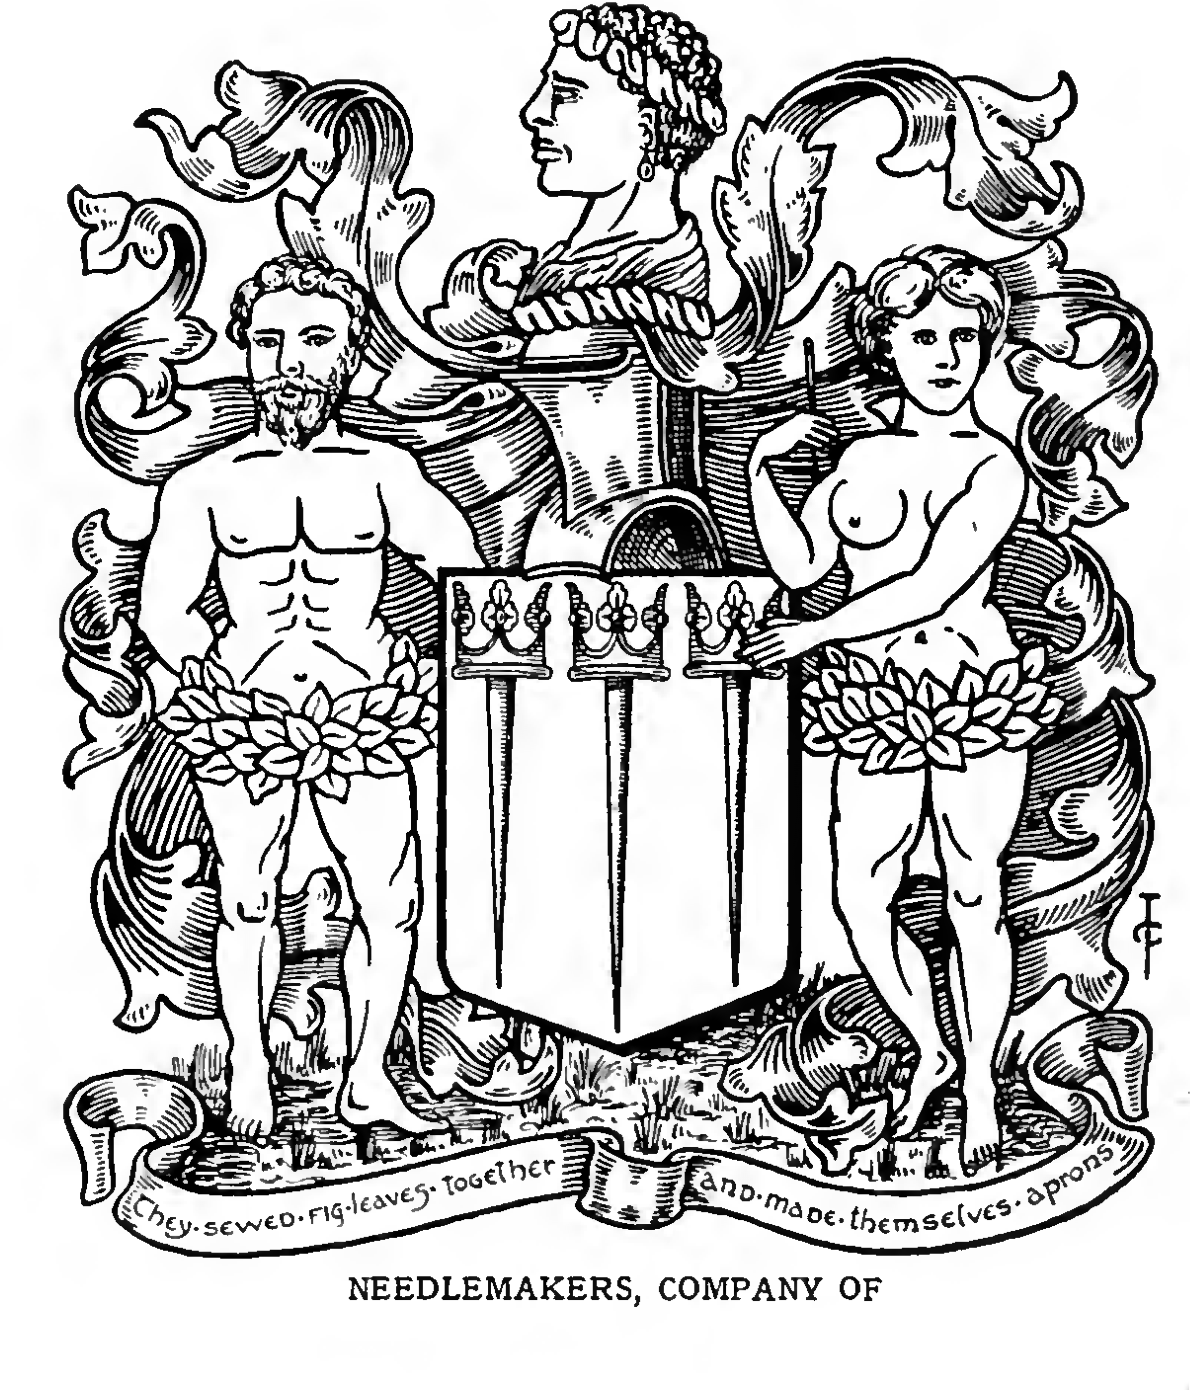 NEEDLEMAKERS, The Worshipful Company of, London.